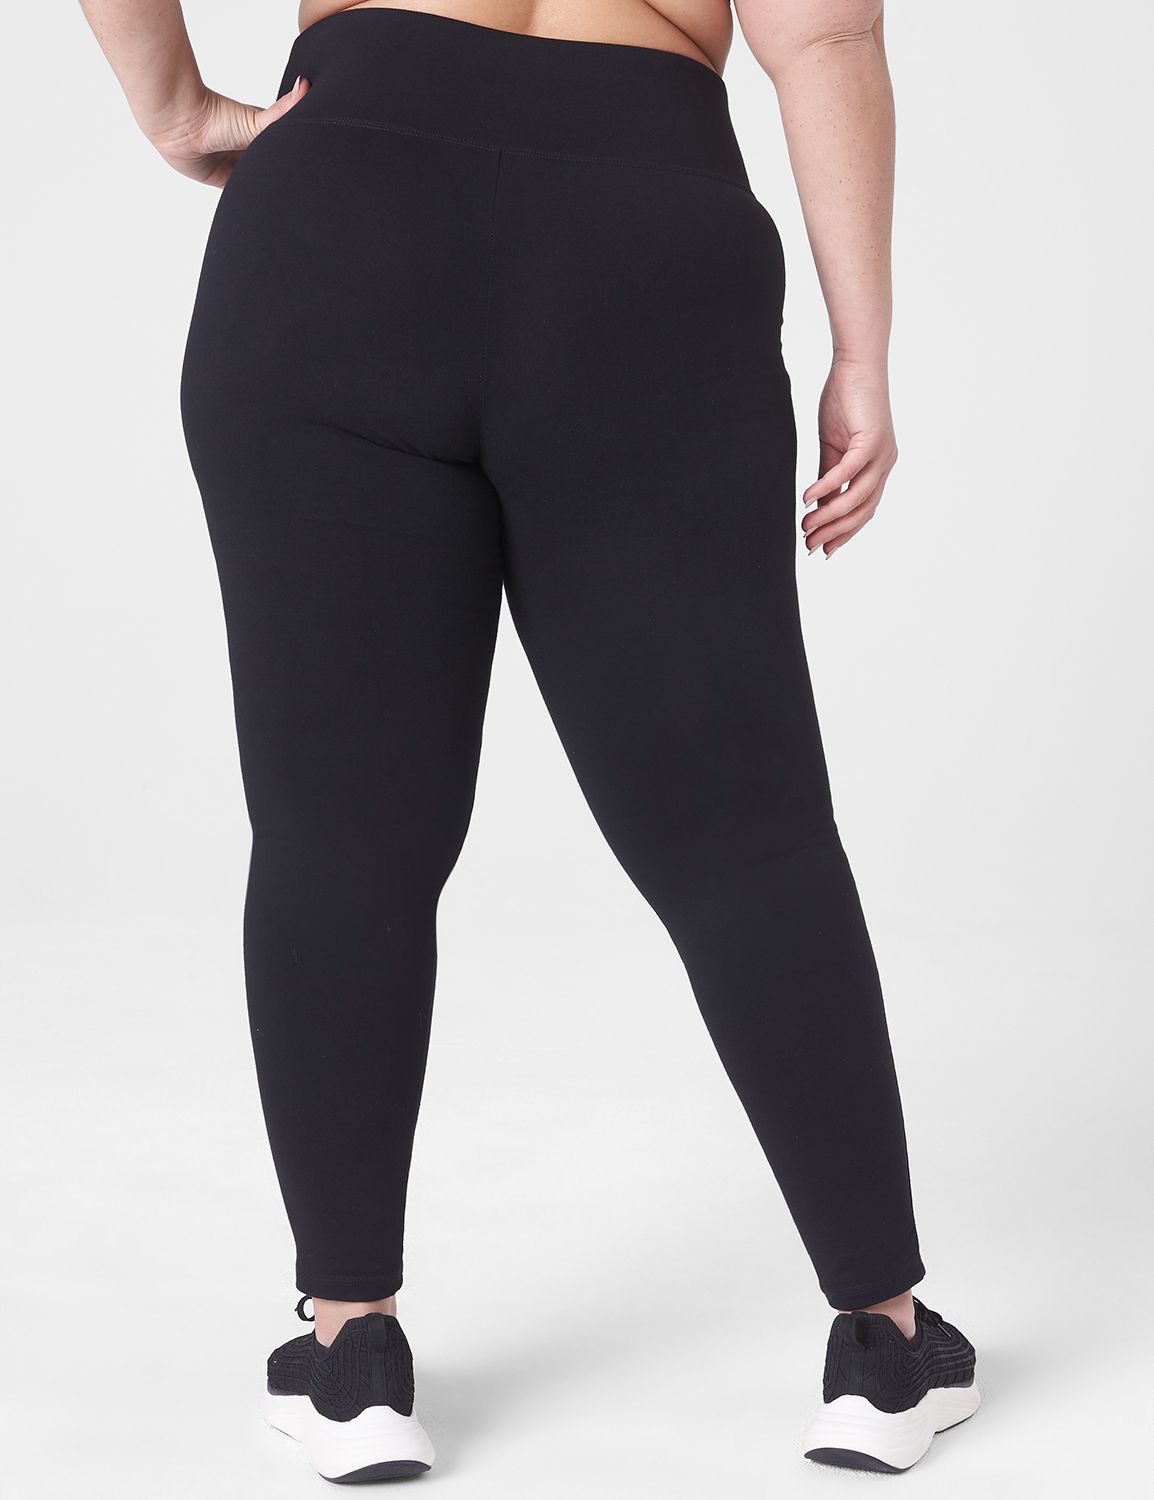 Sizing help on the stretch high rise 7/8 pants please! Details in